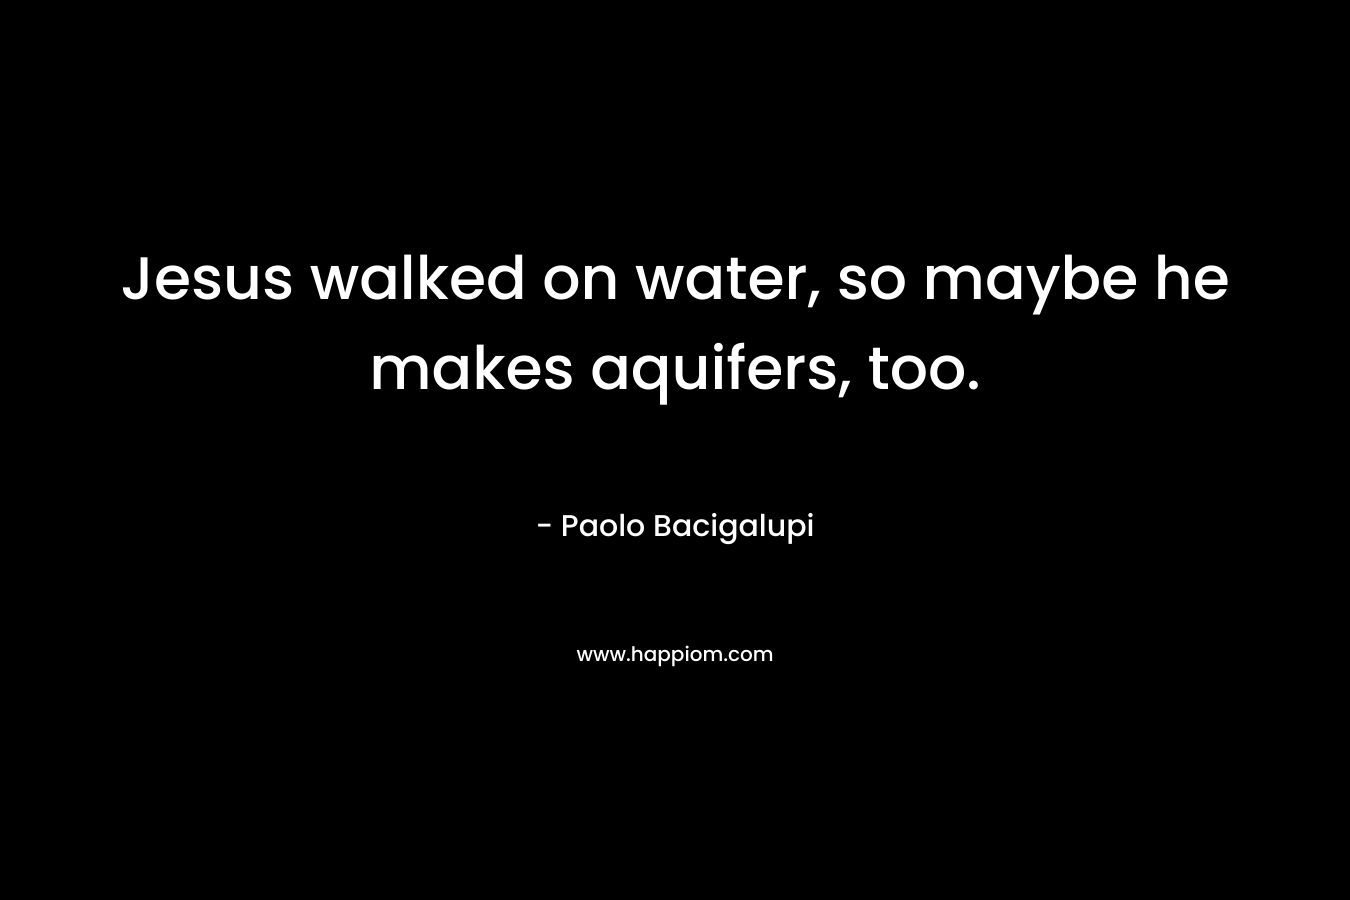 Jesus walked on water, so maybe he makes aquifers, too.